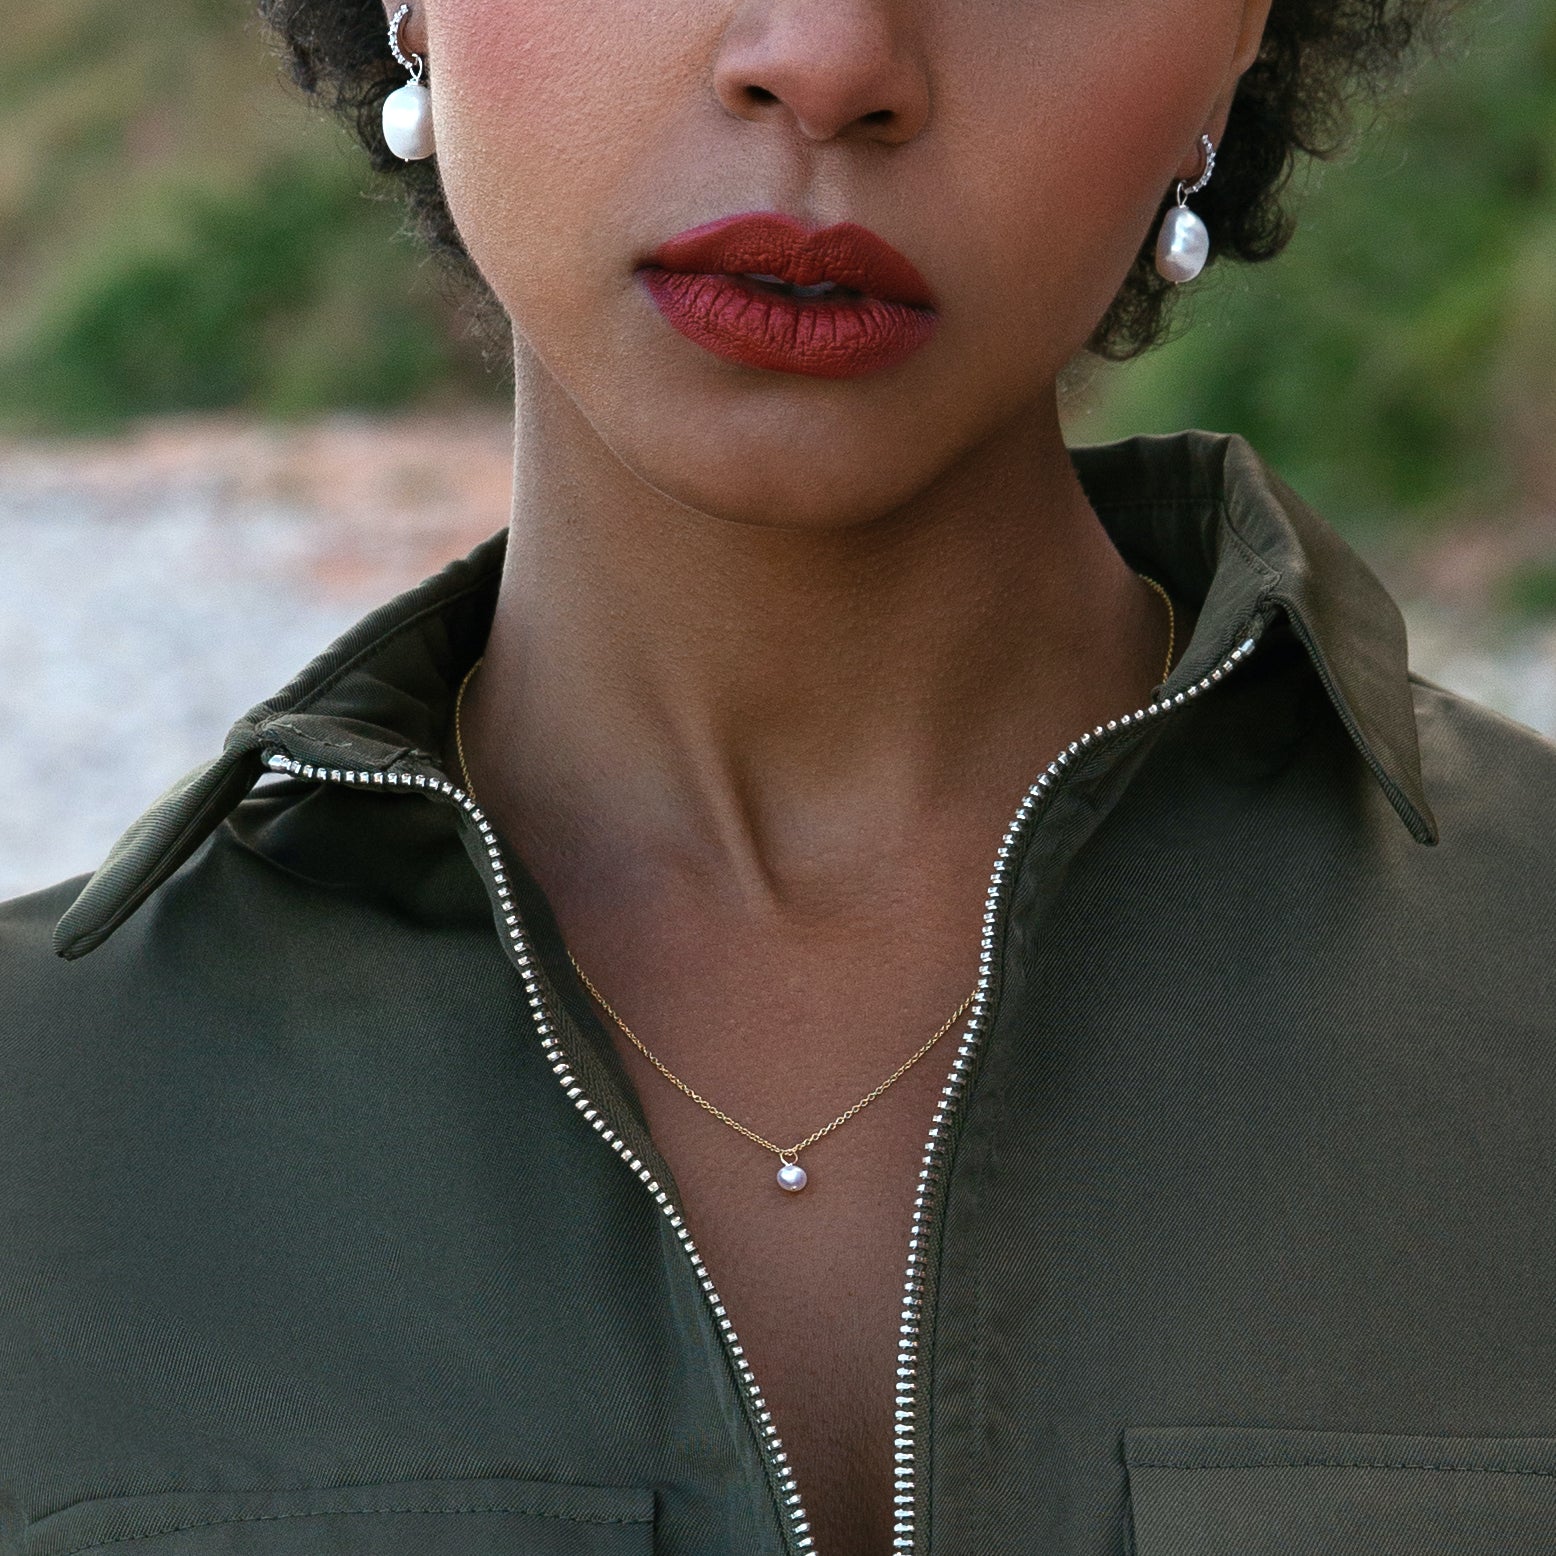 Gold single pearl necklace around the neck of a woman wearing a green zip collar top, red lipstick and silver diamond style large pearl drop earrings in her ears